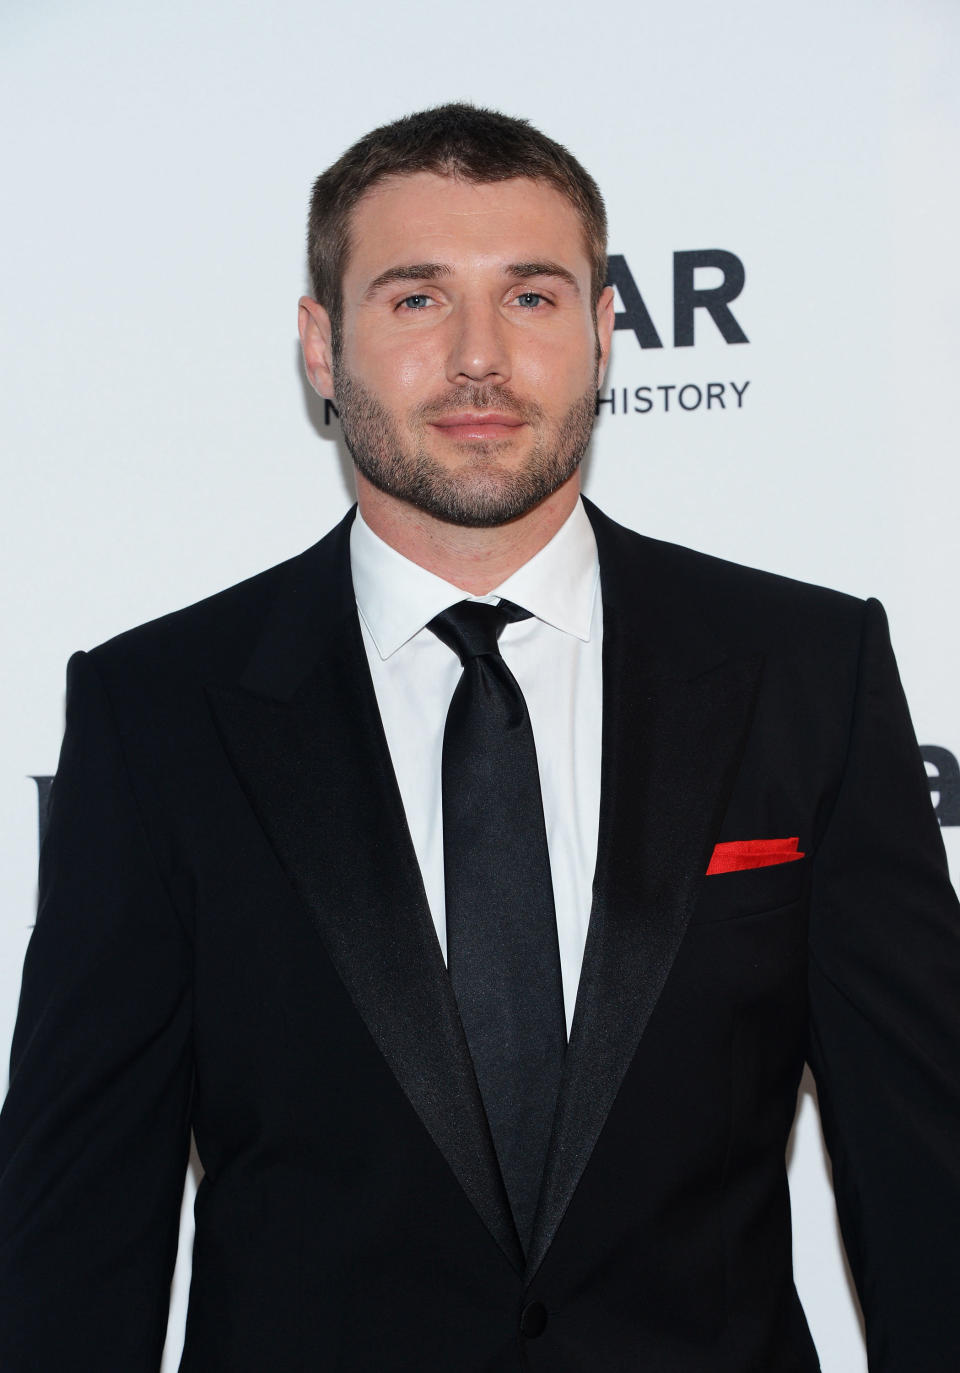 One very active <a href="http://www.nytimes.com/2011/05/14/sports/two-straight-athletes-combat-homophobia.html?pagewanted=all">straight ally is Ben Cohen</a>, an English rugby world cup champion, who retired to start <a href="http://www.standupfoundation.com/">The Ben Cohen StandUp Foundation</a>, which “supports organizations, programs and people that advance equality for the LGBT community and help for at-risk youth by standing up against bullying.” Cohen recently stripped down to his underwear to benefit his organization and <a href="http://www.huffingtonpost.com/2012/08/06/ben-cohen-strips-for-equa_n_1747838.html">spoke with Huffington. in August</a>. He said, “No one should have to tolerate that [bullying], no matter what your sexual orientation, the color of your skin, your size or the color of your hair is.” 